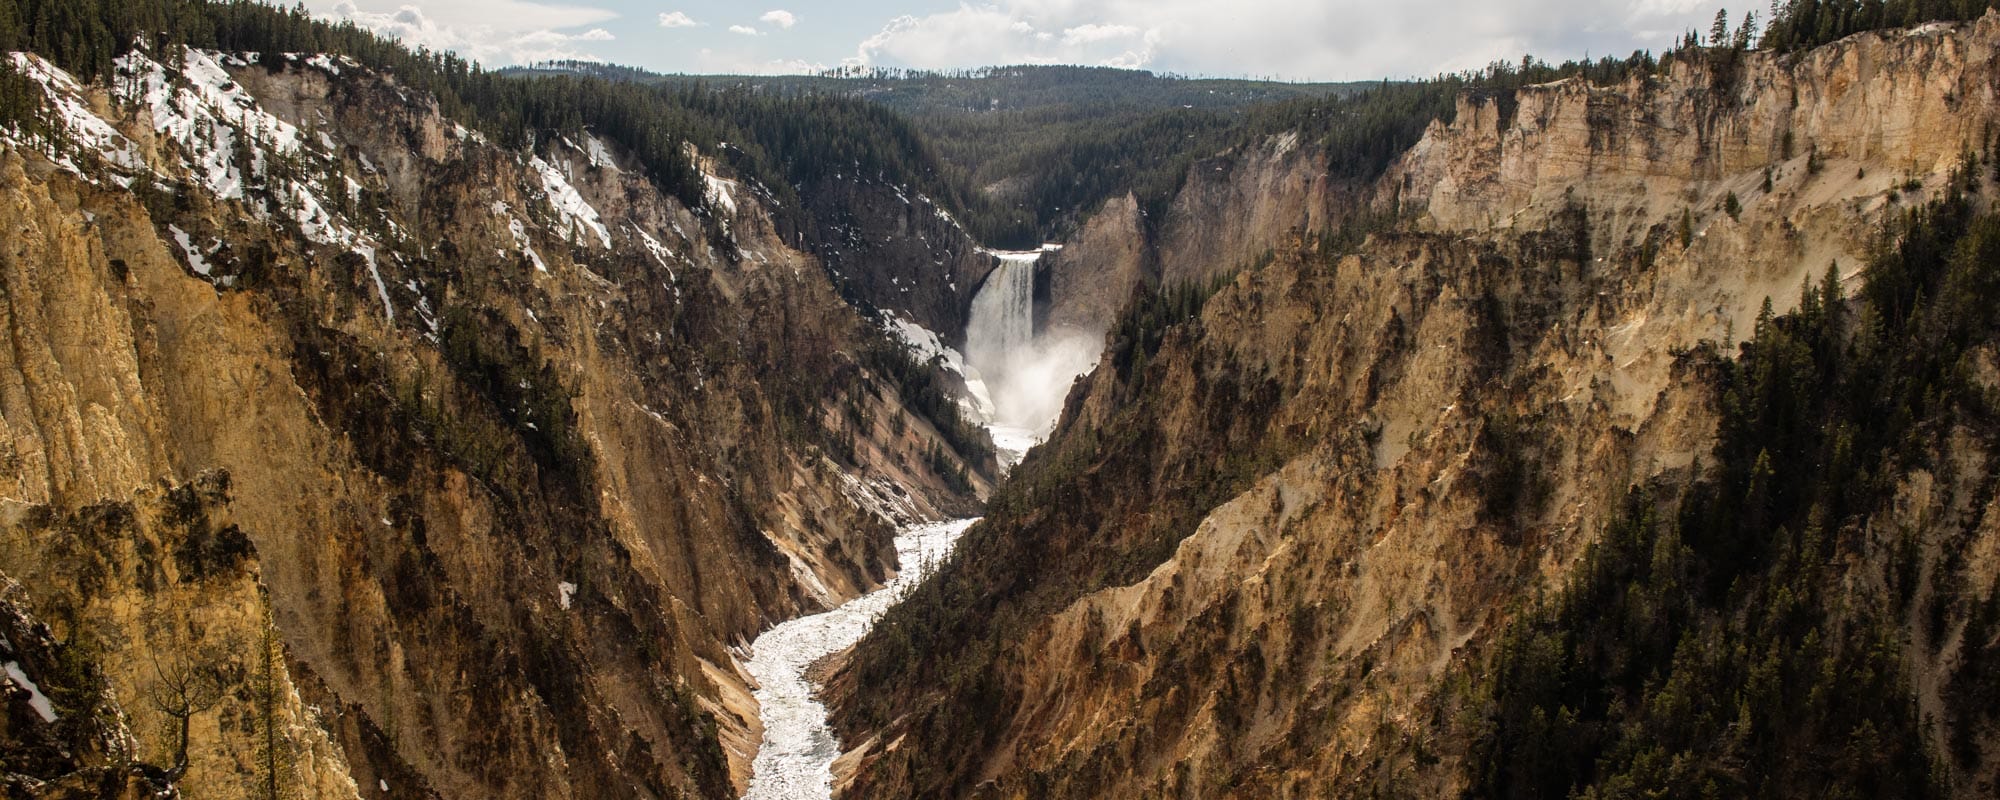 Artist Point, Grand Canyon of the Yellowstone, Yellowstone National Park, iconic overlooks and viewpoints in the national parks